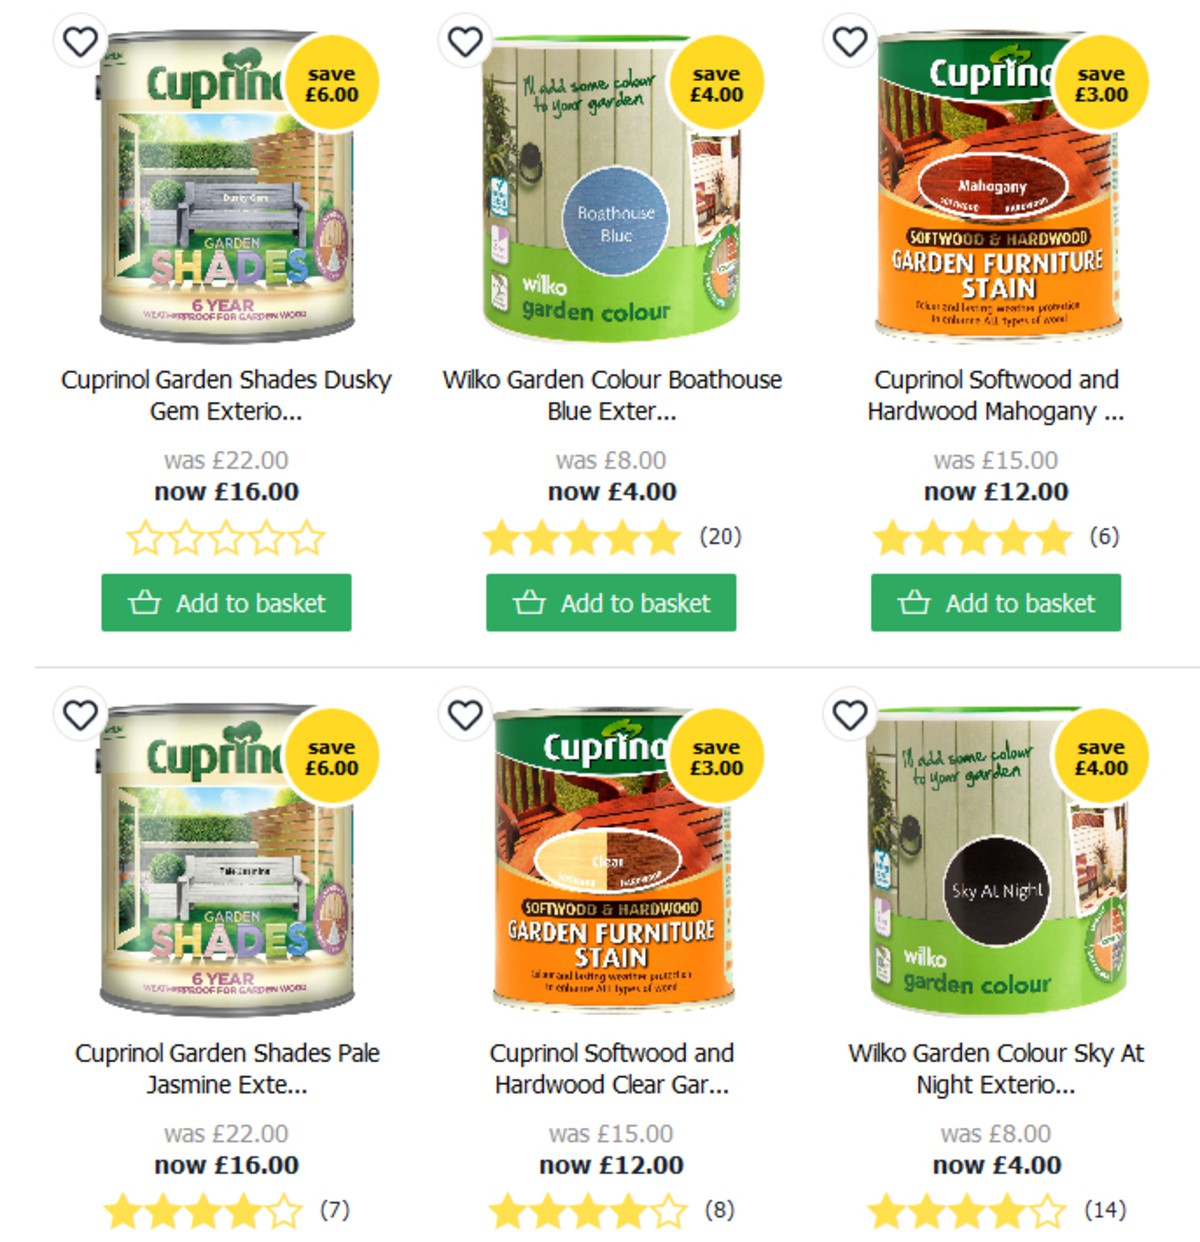 Wilko External Woodcare Offers Offers from 30 April